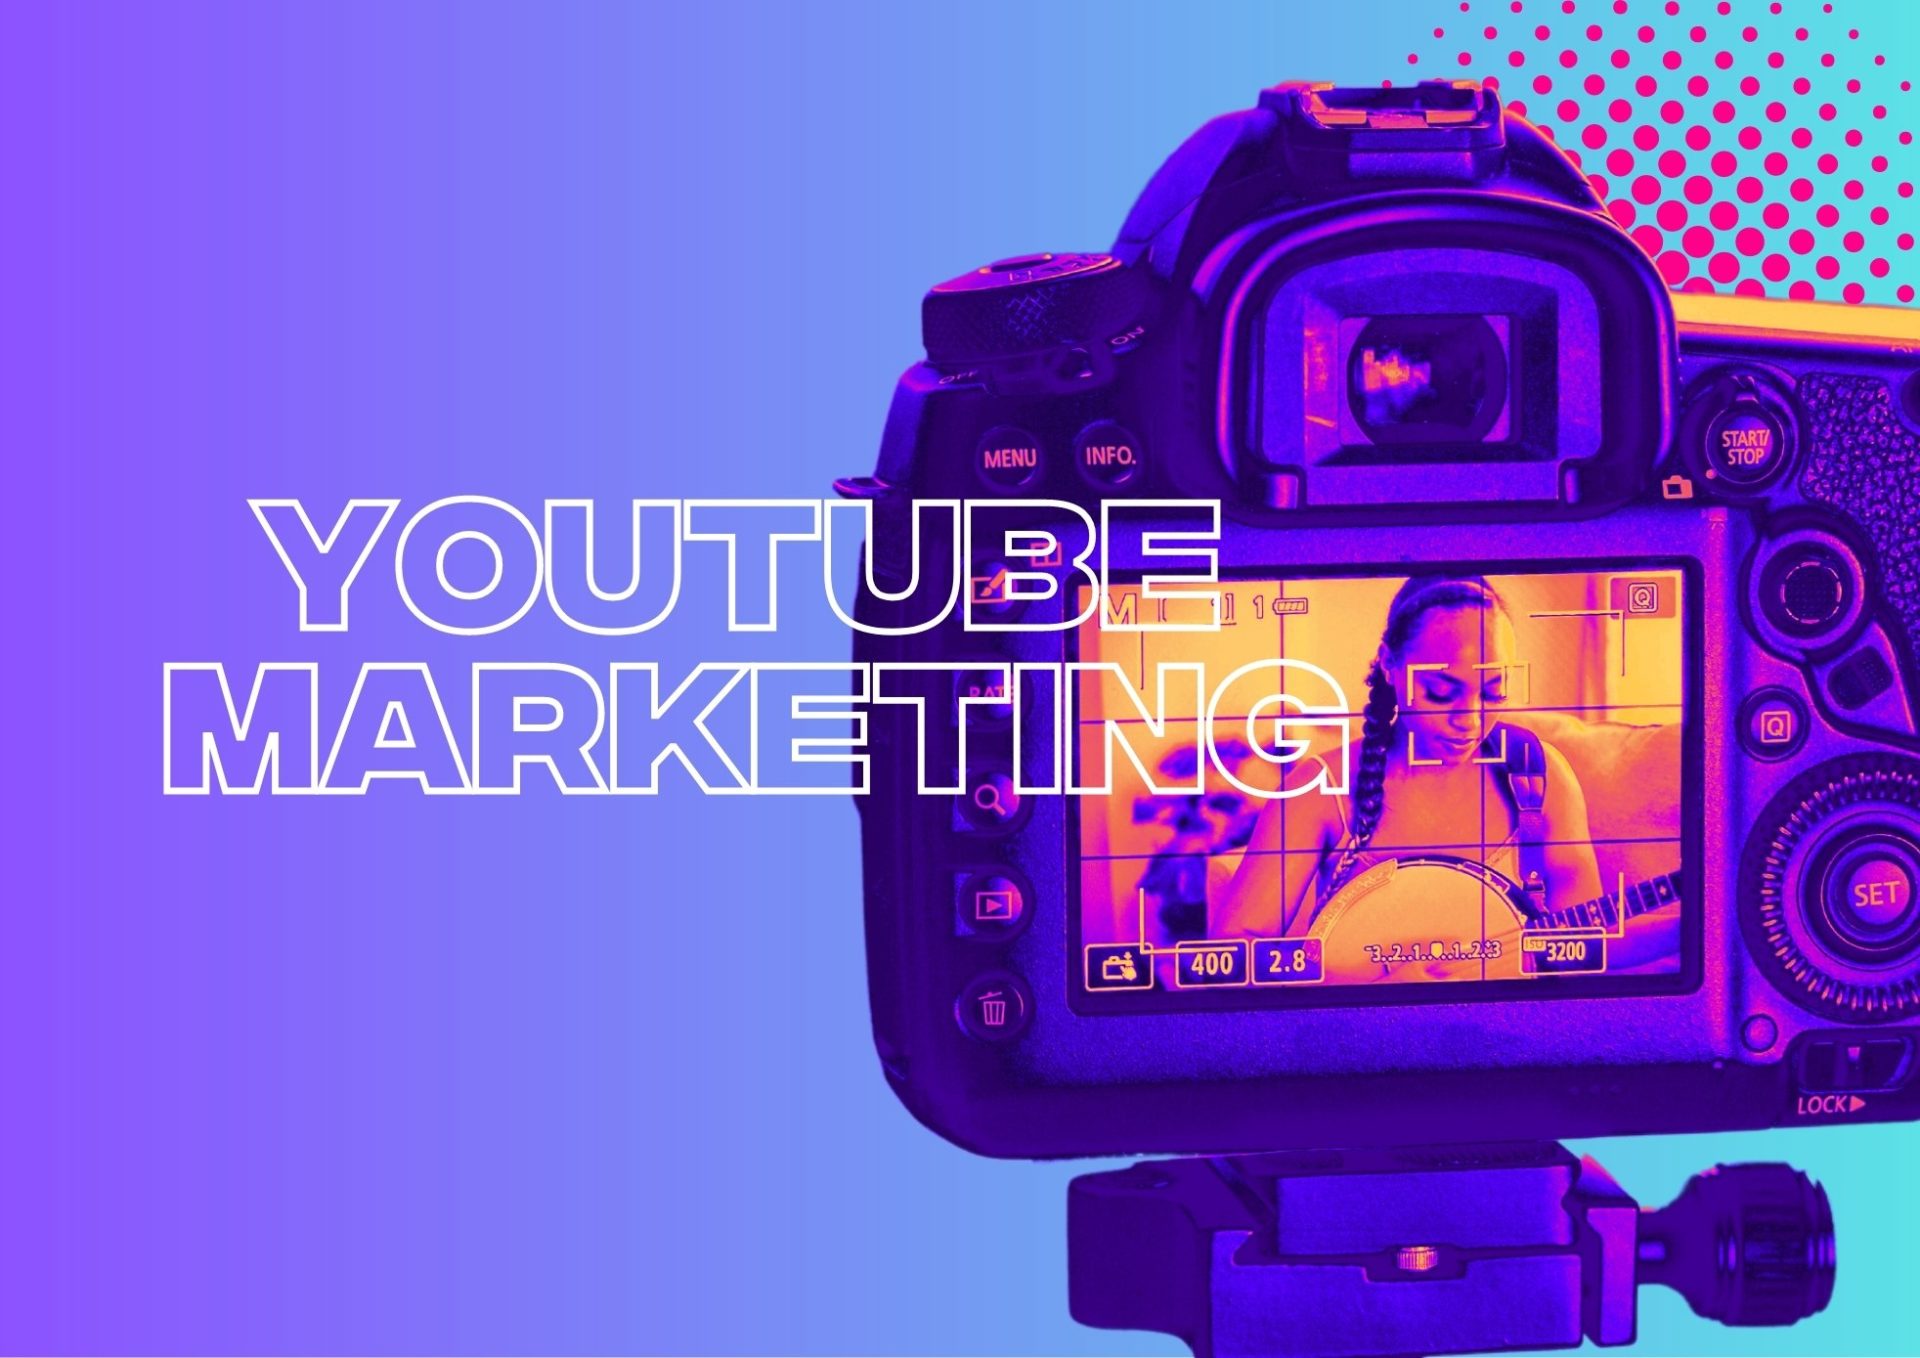 Influencer Marketing On YouTube: Pros And Cons